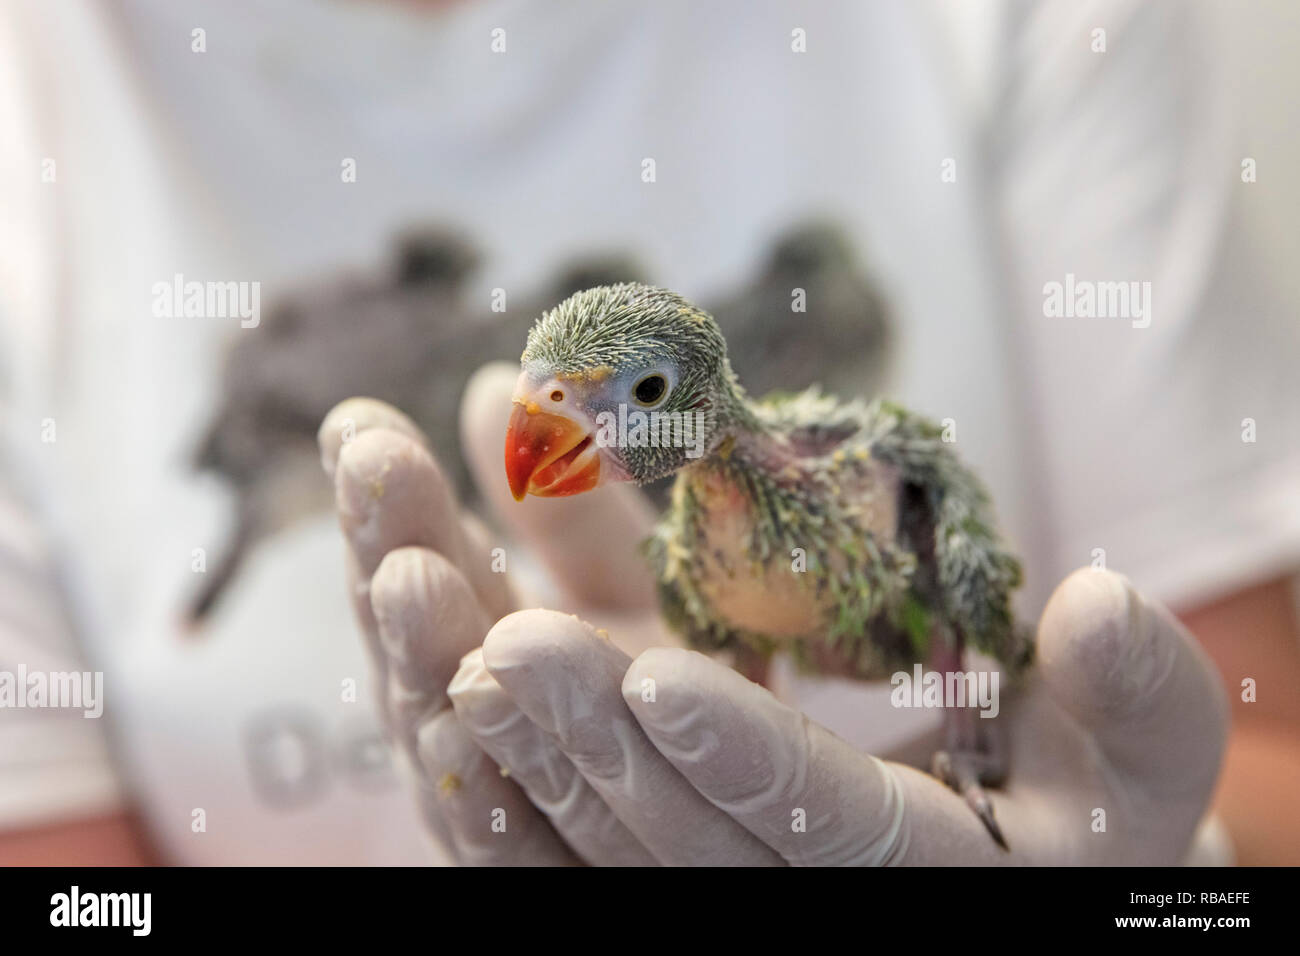 The Netherlands, Amsterdam, Bijlmermeer, Animal Rescue Center DeToevlucht. Young Rose-ringed parakeet. Stock Photo